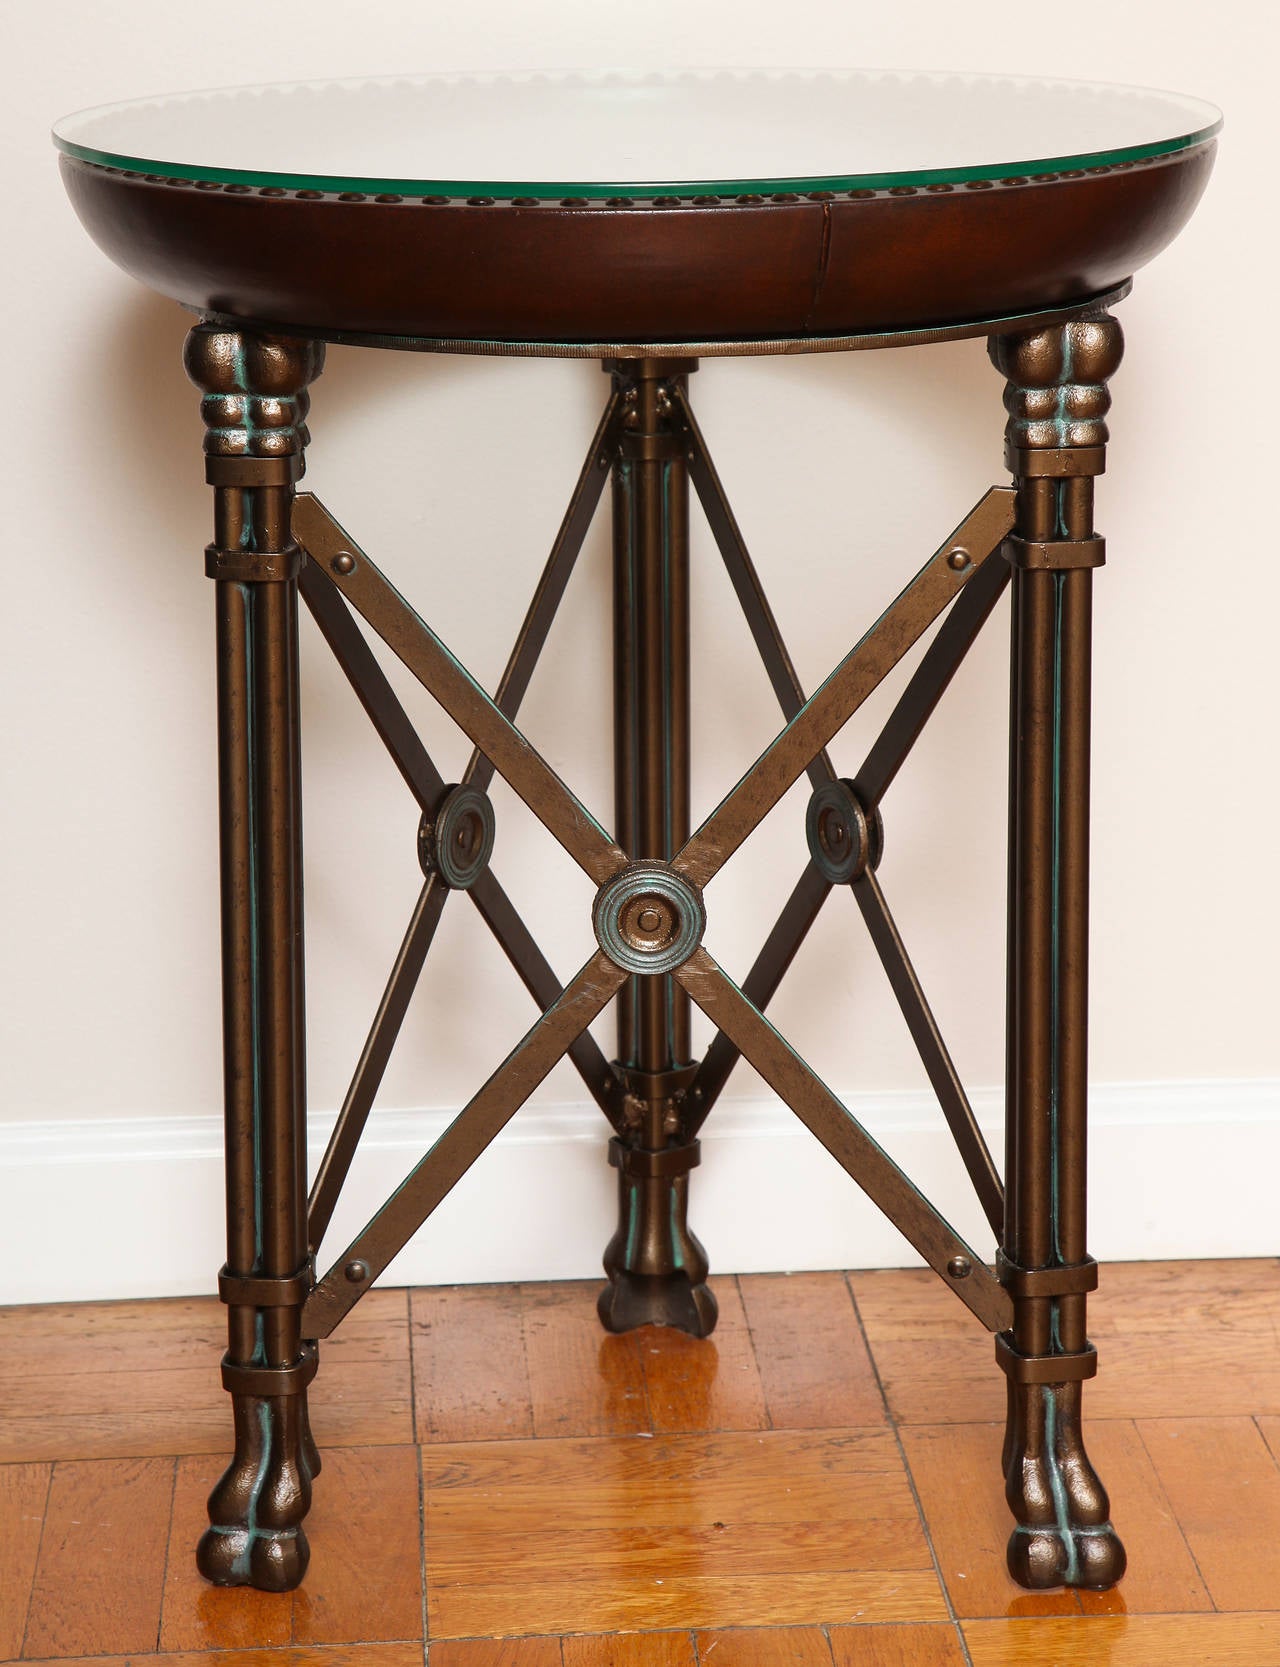 A pair of round side tables by Maitland-Smith; the drum tops in deep brown leather inset with 2 tiers of original glass tops resting upon three columnar brass legs with lion paw decoration; with enameled steel X stretcher between each leg.